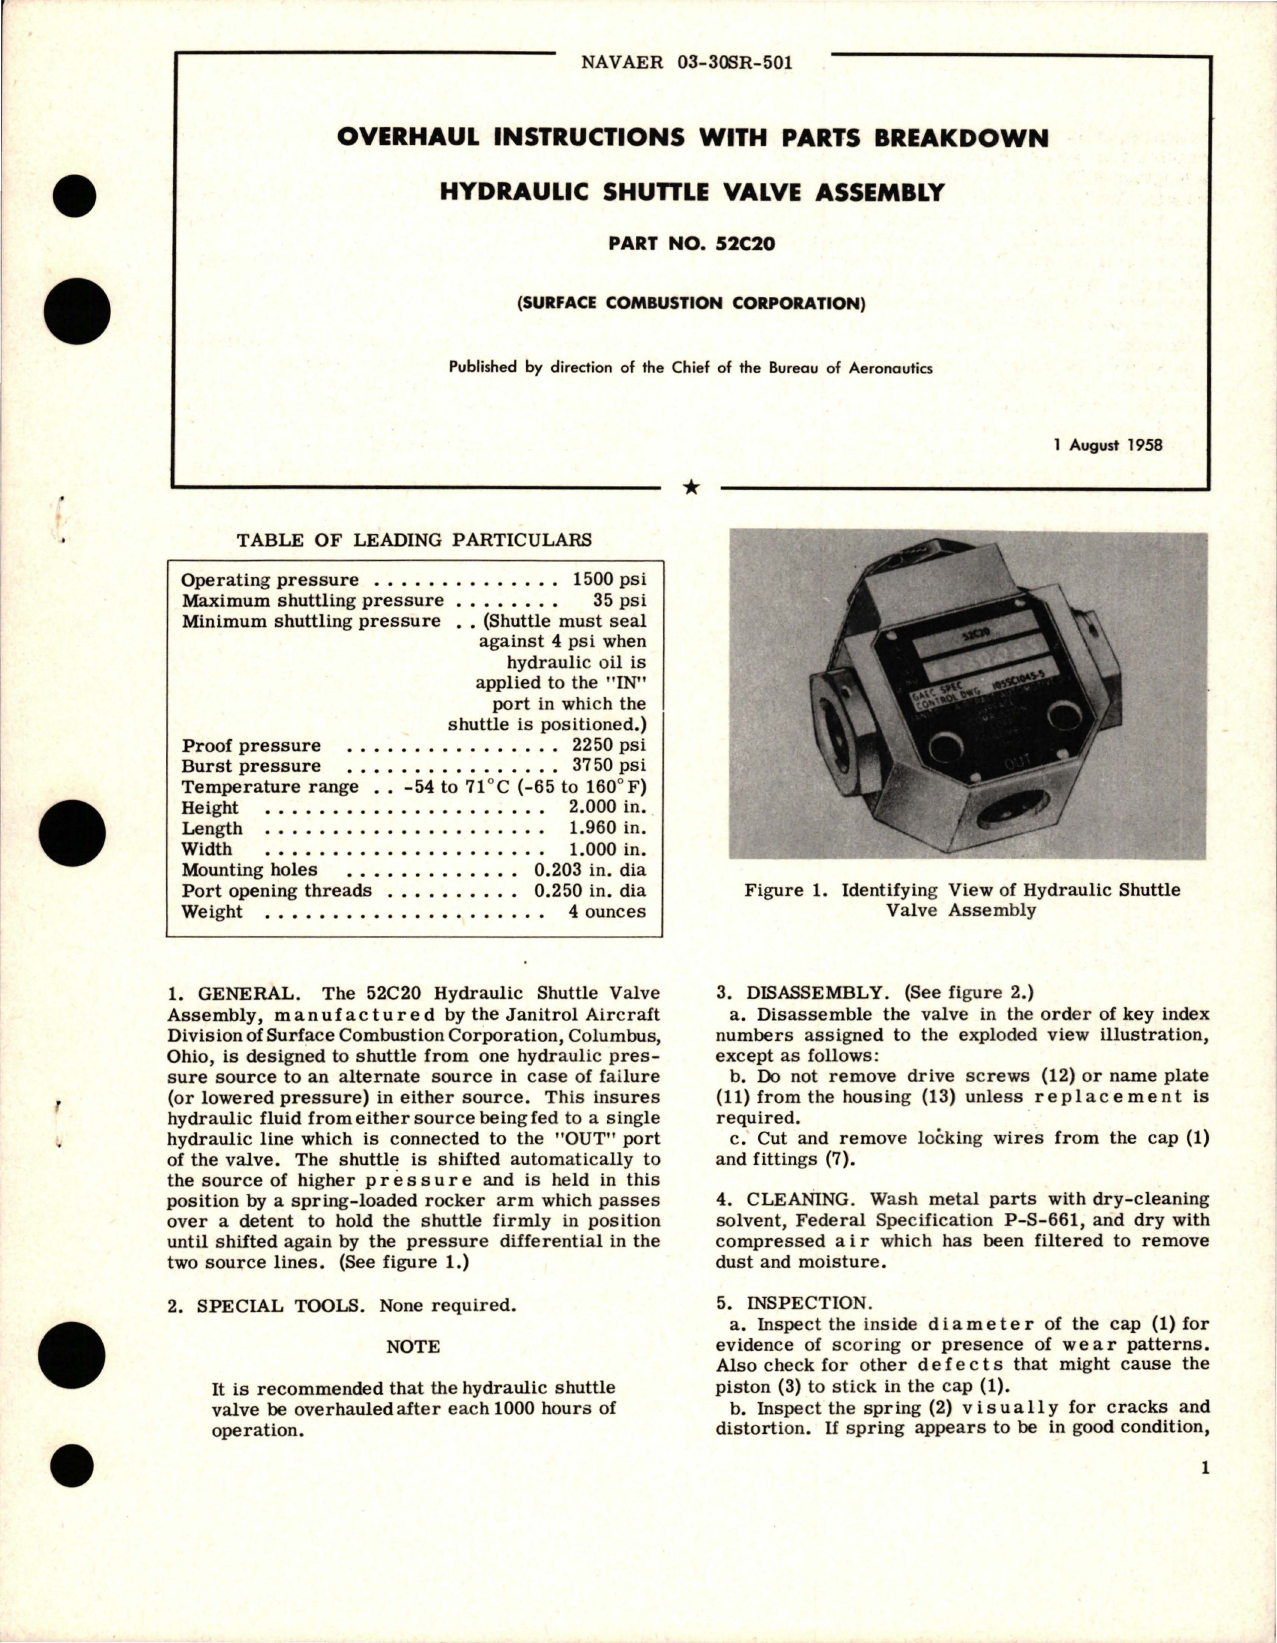 Sample page 1 from AirCorps Library document: Overhaul Instructions with Parts Breakdown for Hydraulic Shuttle Valve Assembly - Part 52C20